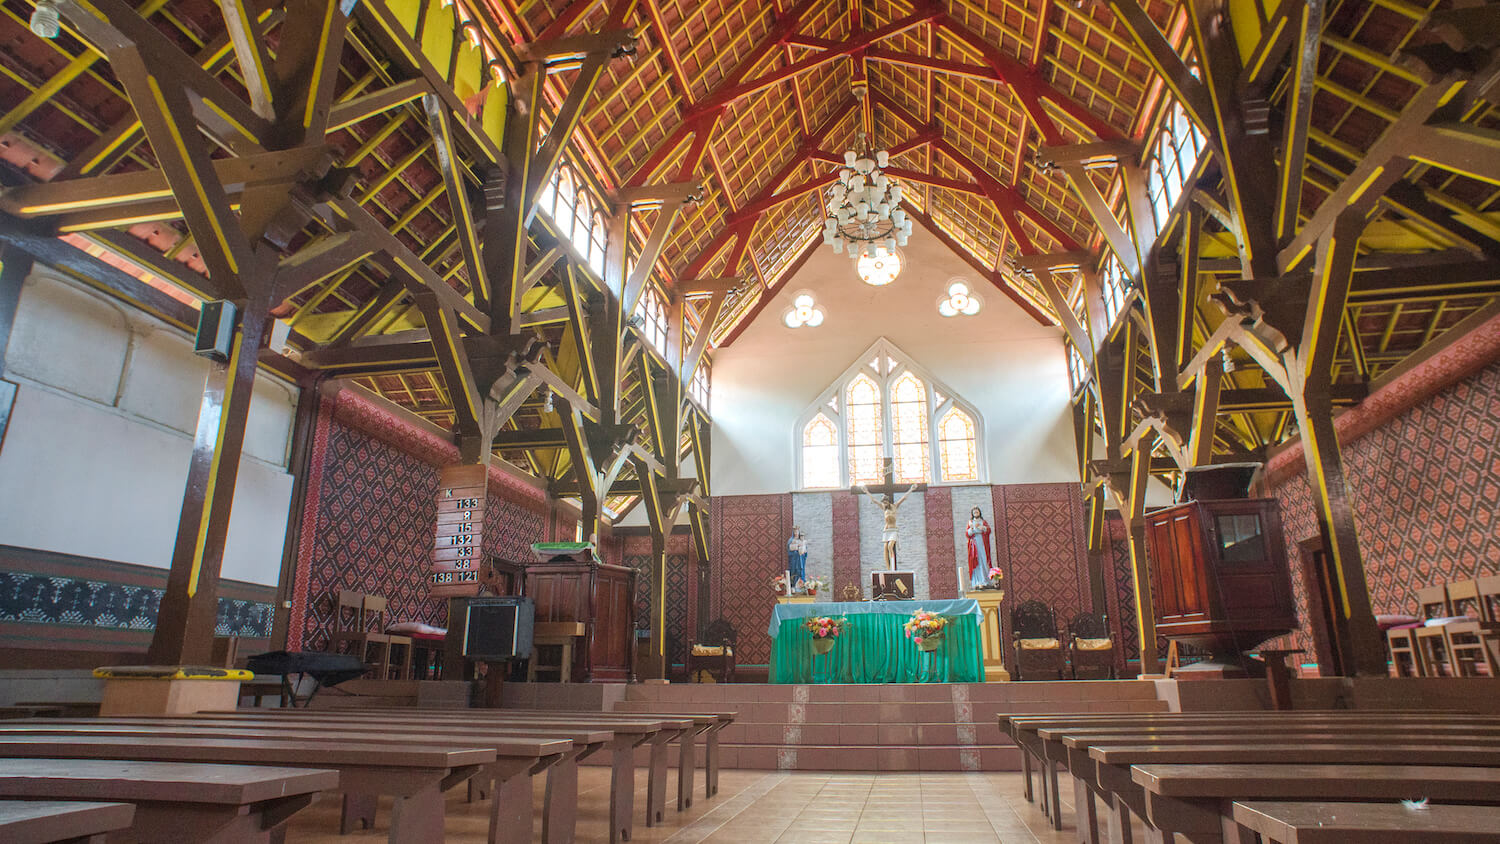 The church’s interior boasts walls painted in Sikkanese ikat motifs. Photo by Andra Fembriarto